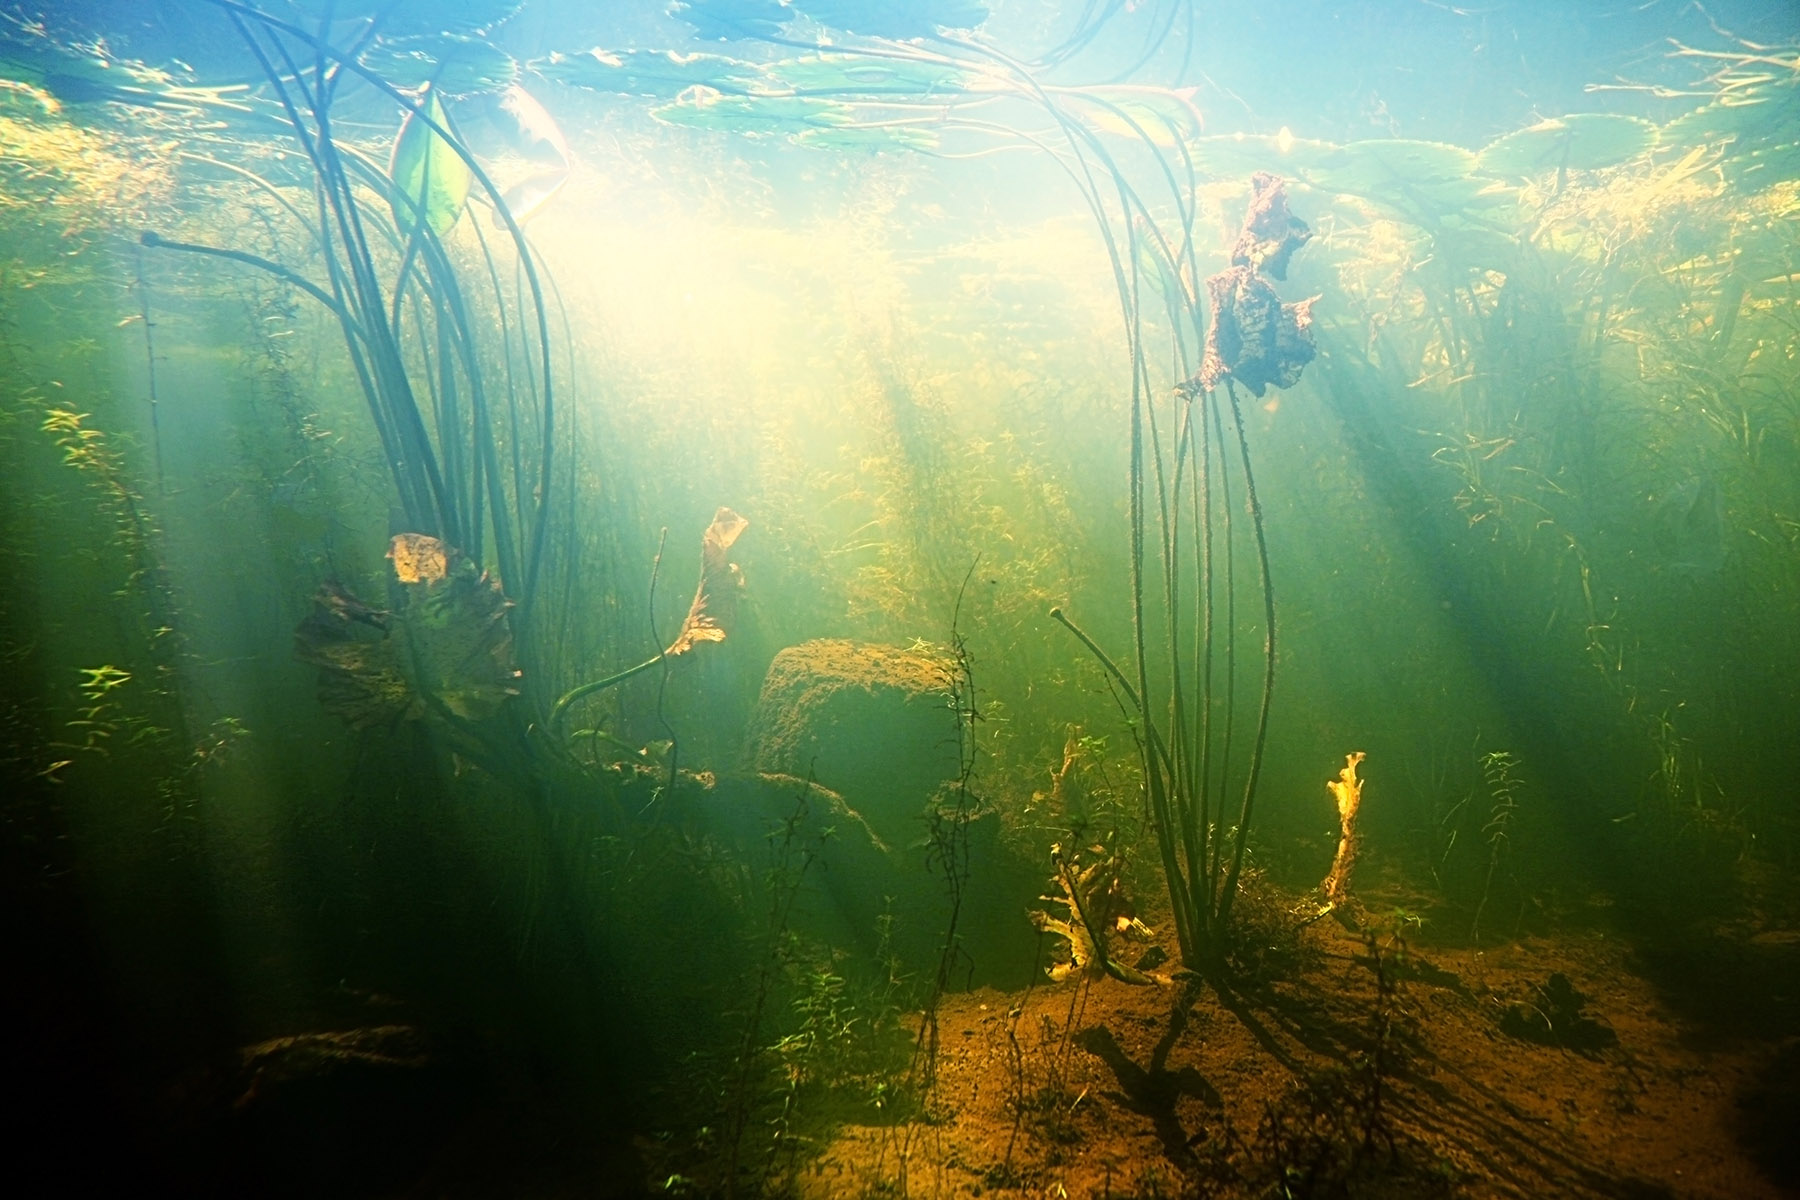 Image shows a photo taken beneath the surface of a pond, showing a murky green/blue water with reeds growing from the seabed.